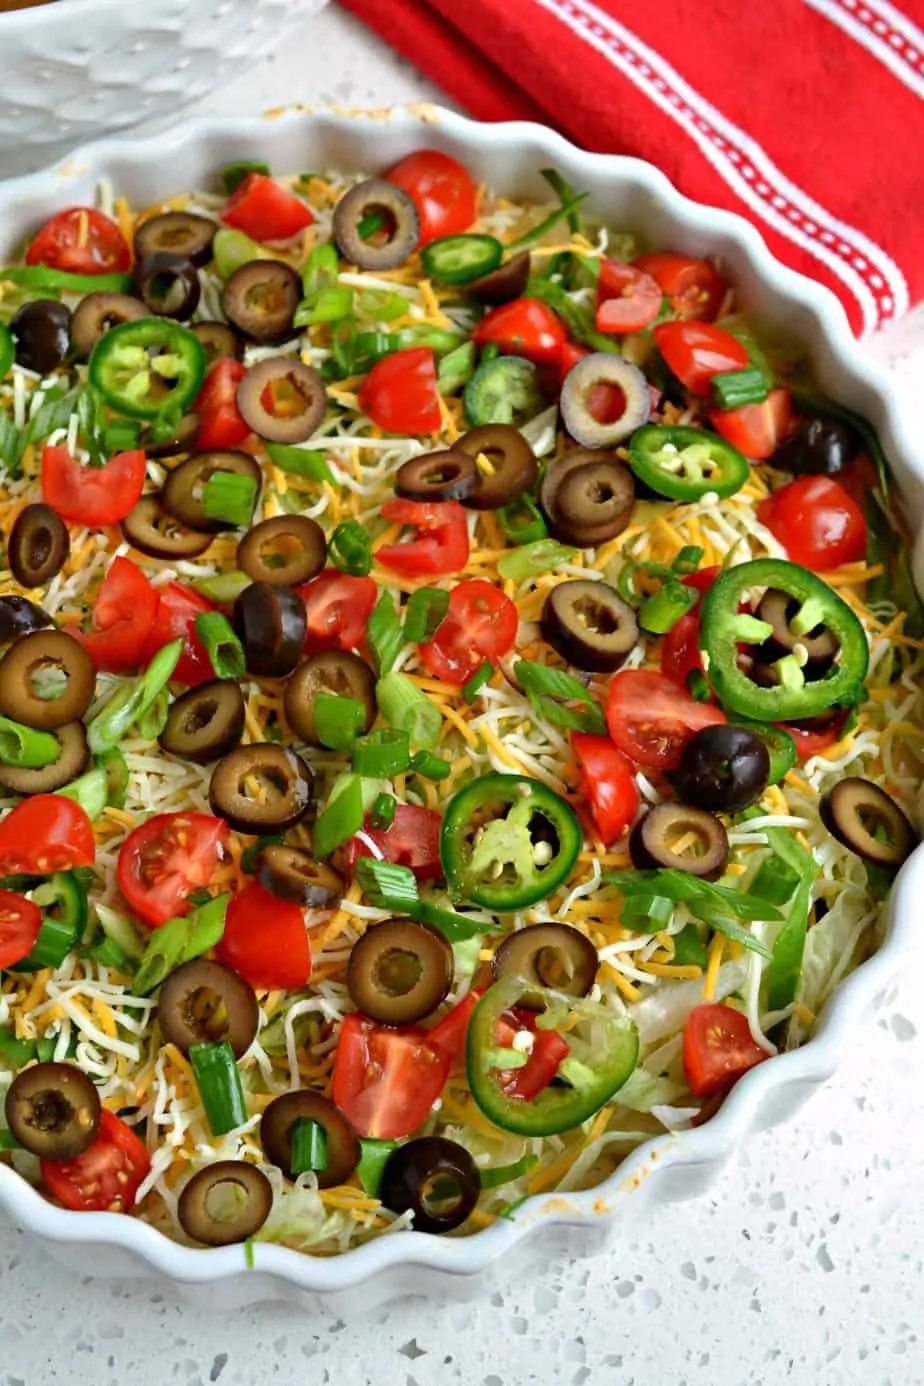 This scrumptious Taco Dip Recipe is made in less than 10 minutes complete with a beautiful array of toppings